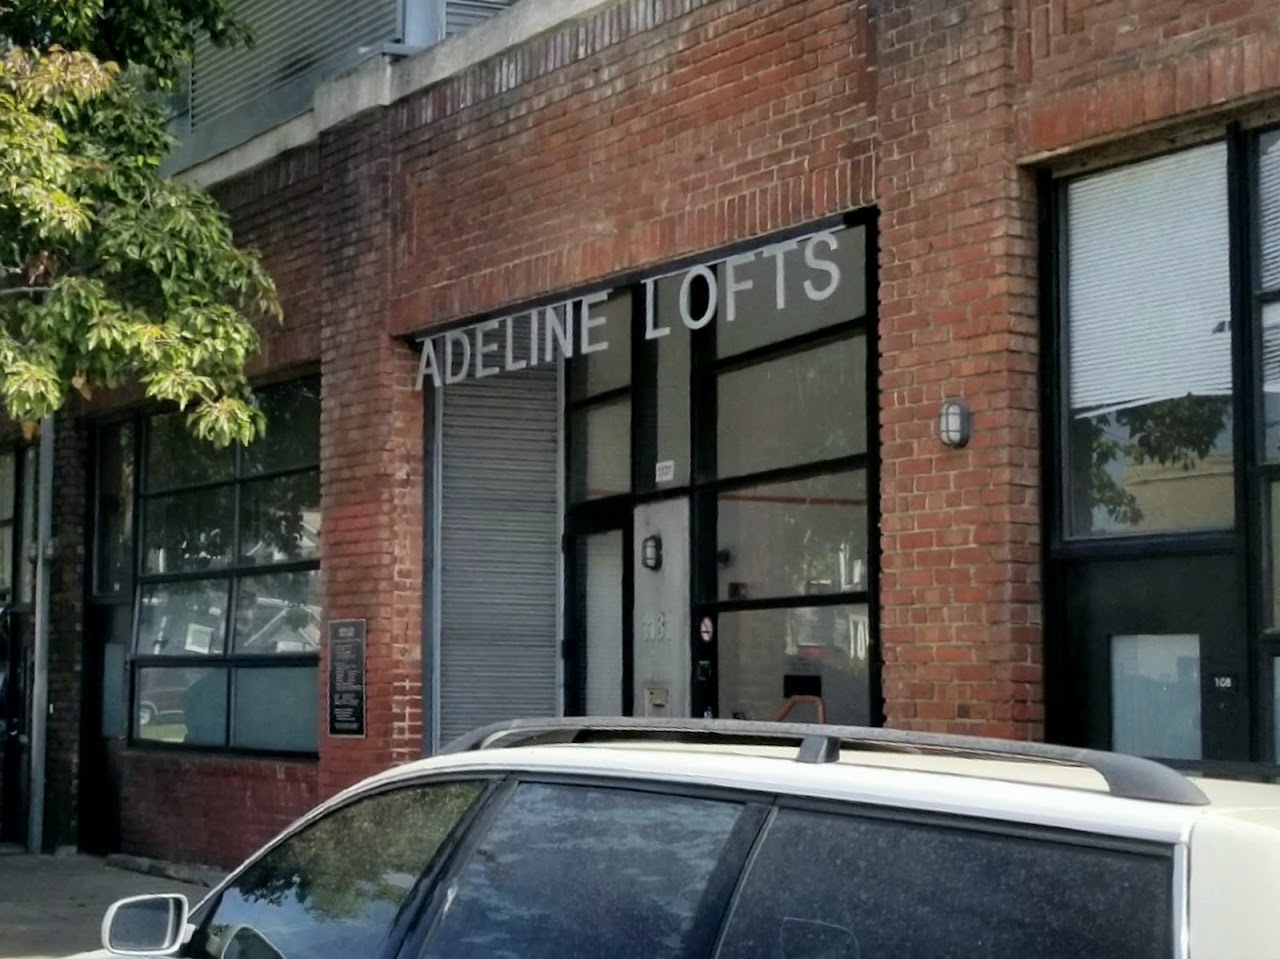 Photo of ADELINE STREET LOFTS. Affordable housing located at 1131 24TH ST OAKLAND, CA 94607